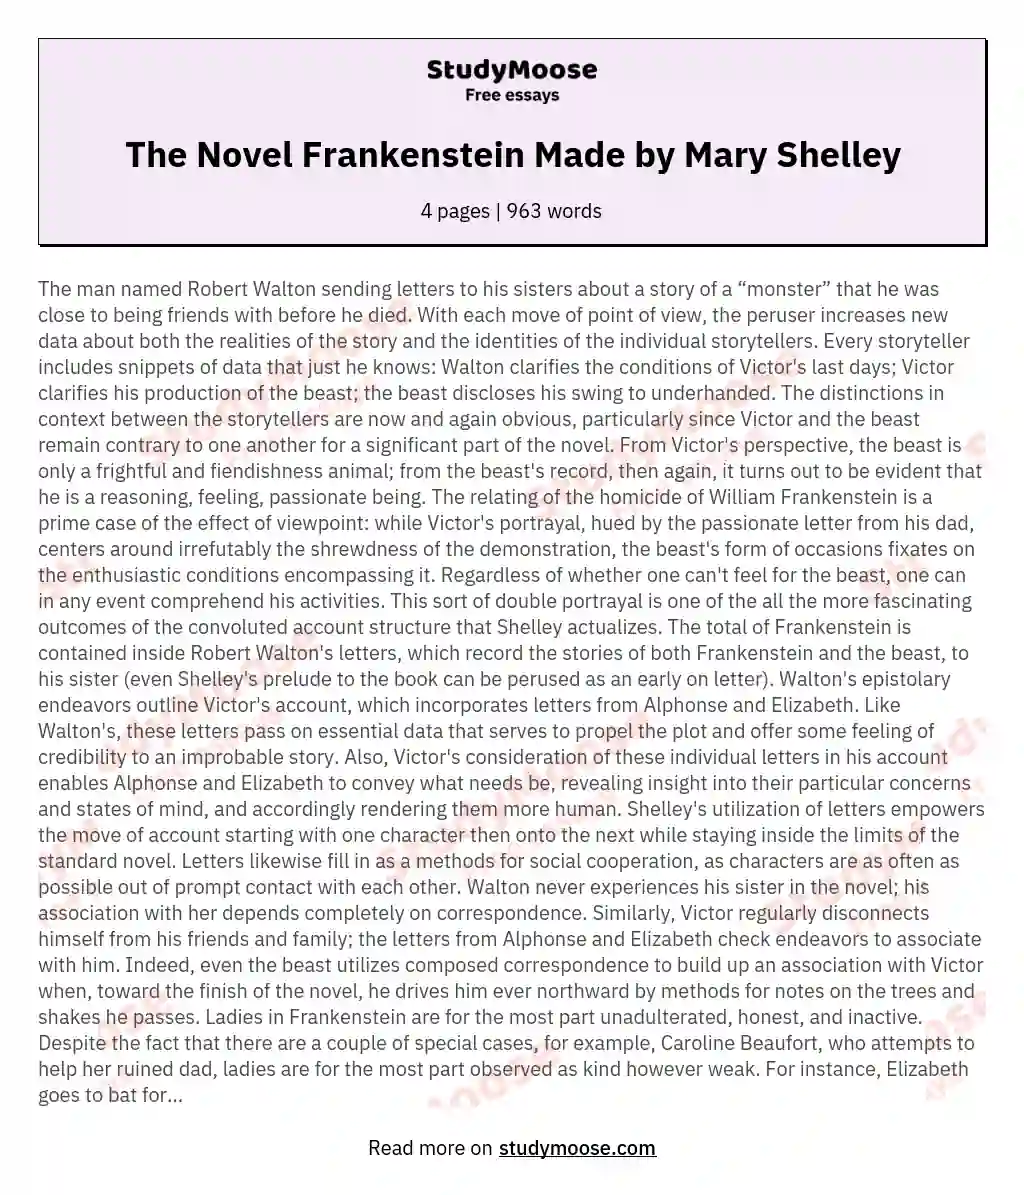 The Novel Frankenstein Made by Mary Shelley essay